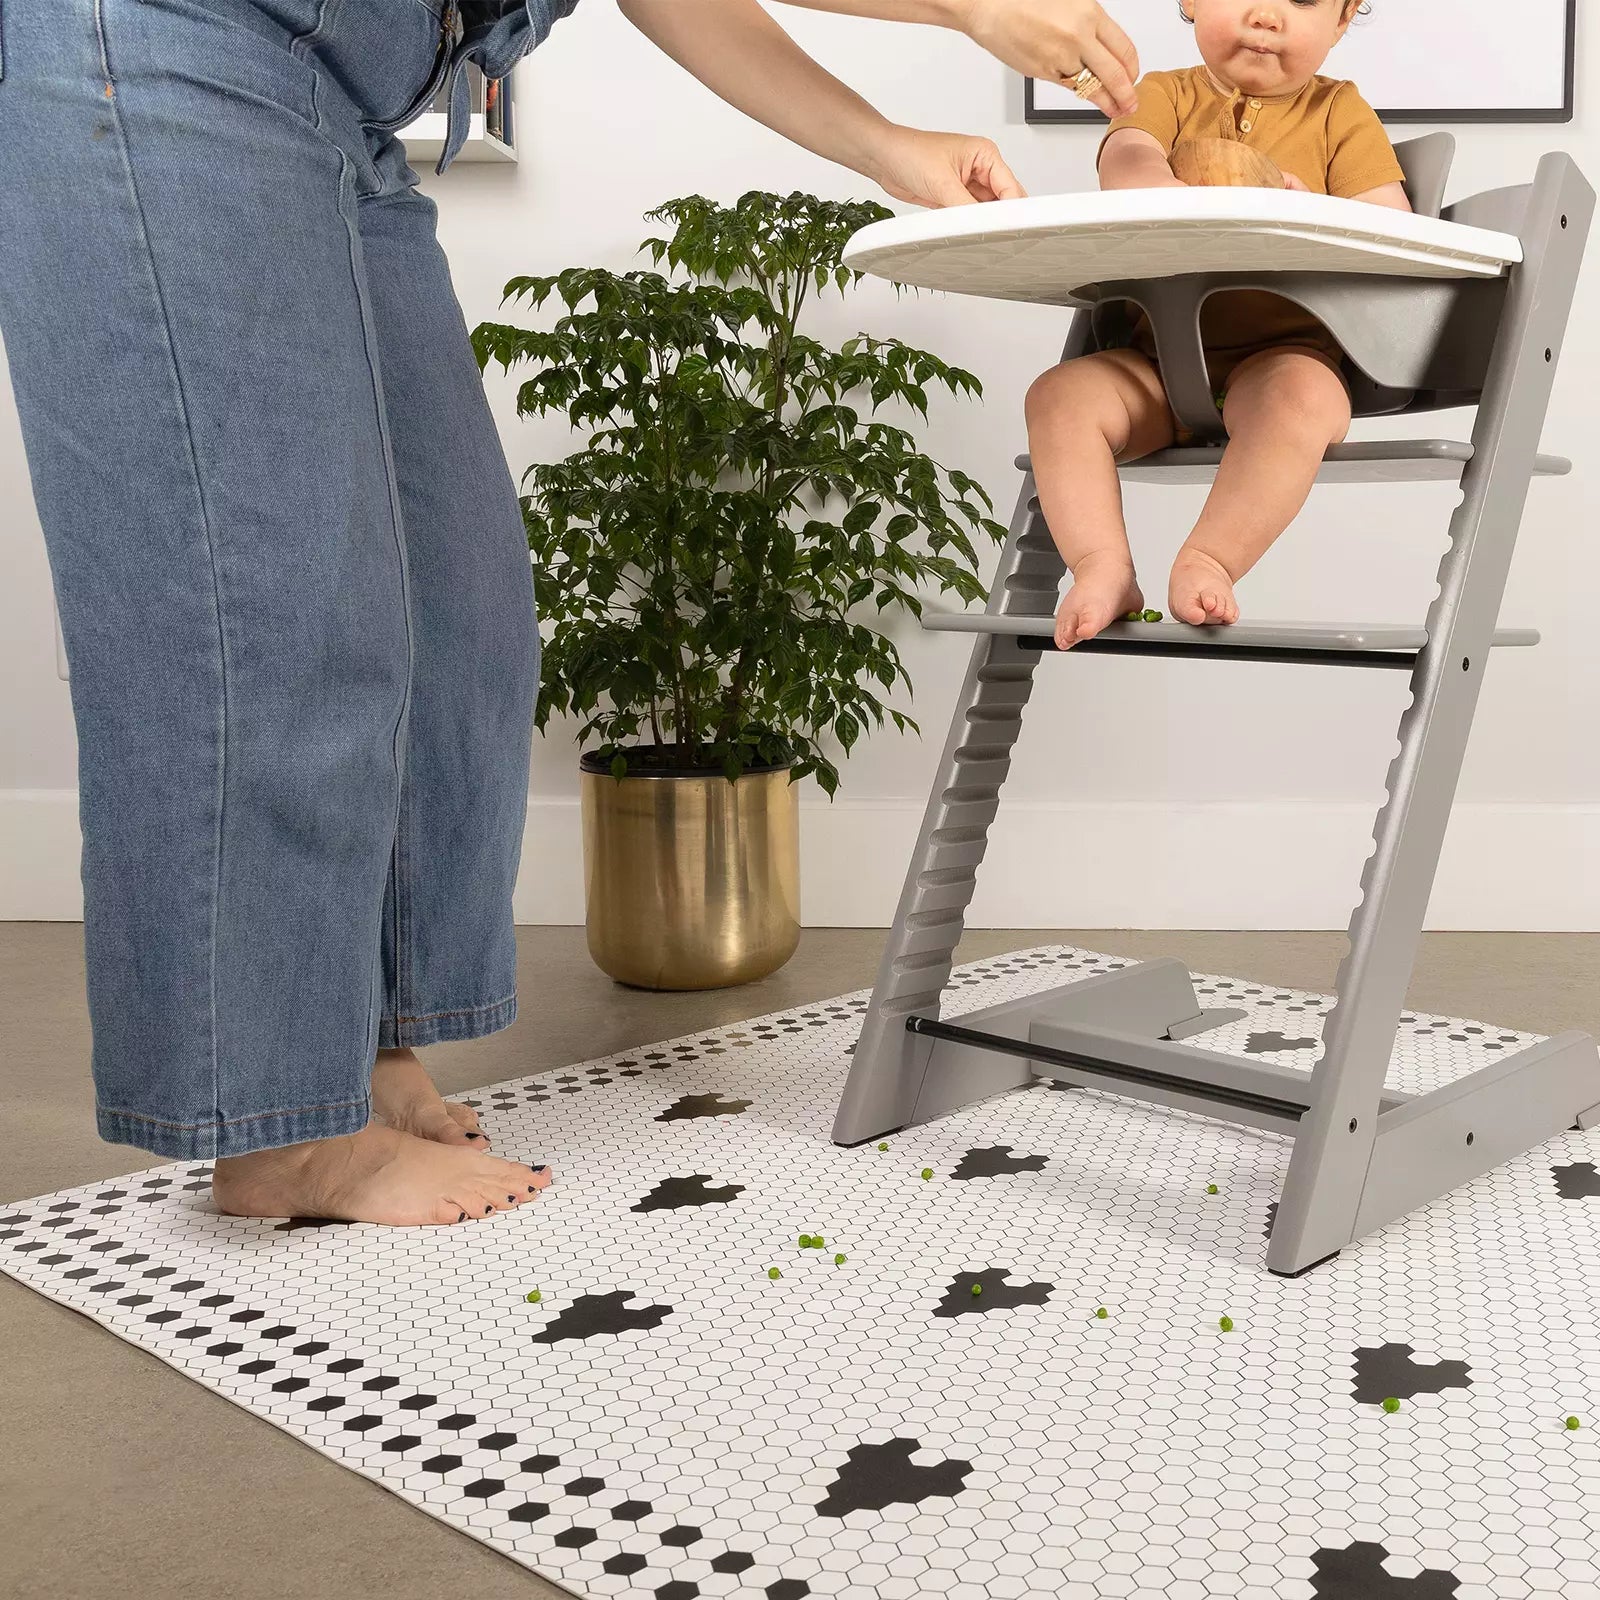 Penny Tile Black and White Heart pattern highchair mat under highchair with baby eating and mom